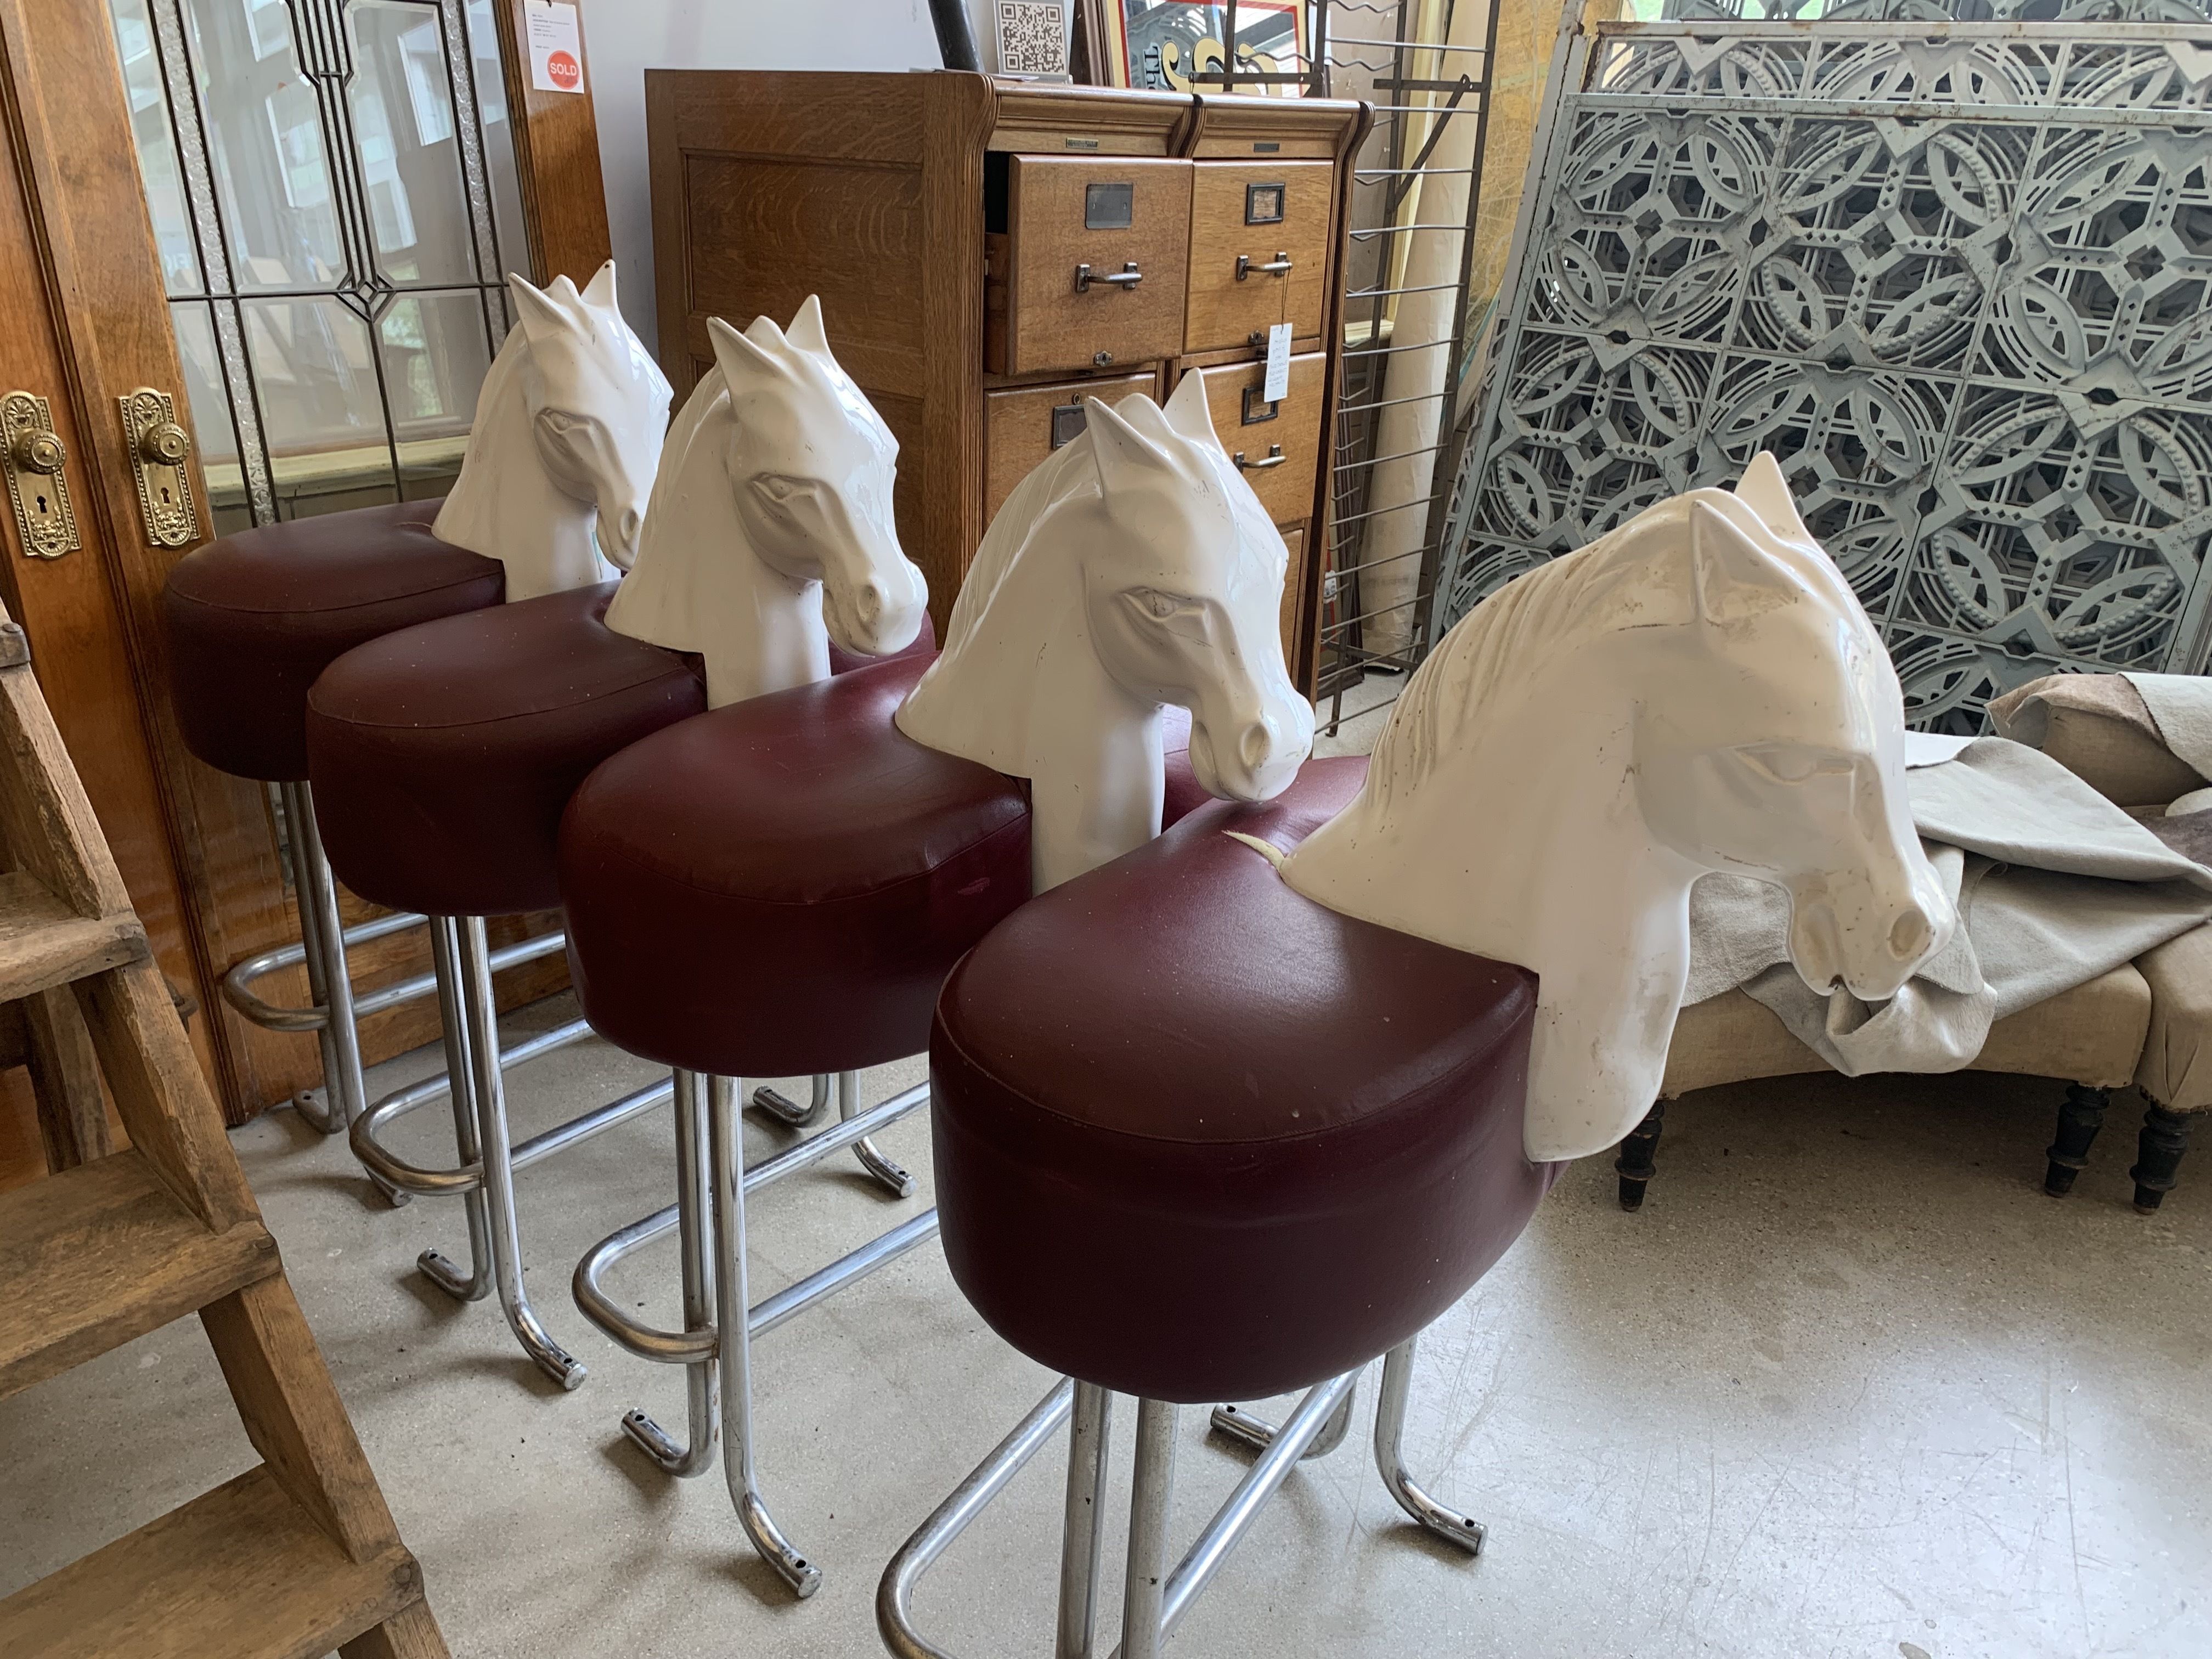 Photo of stools with horse heads on them. 